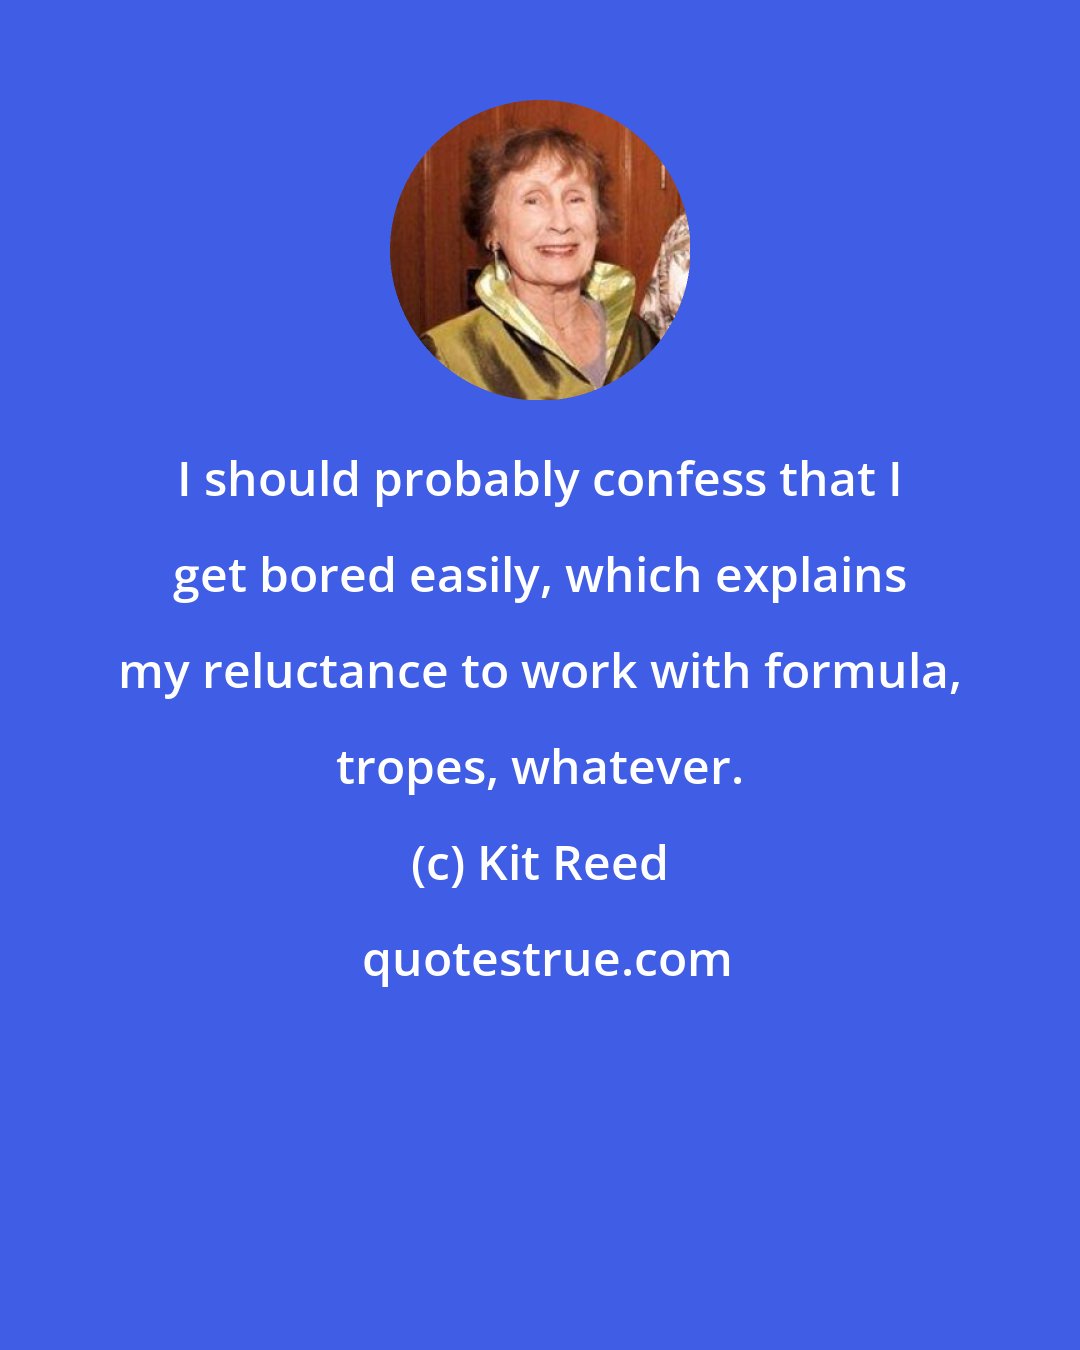 Kit Reed: I should probably confess that I get bored easily, which explains my reluctance to work with formula, tropes, whatever.